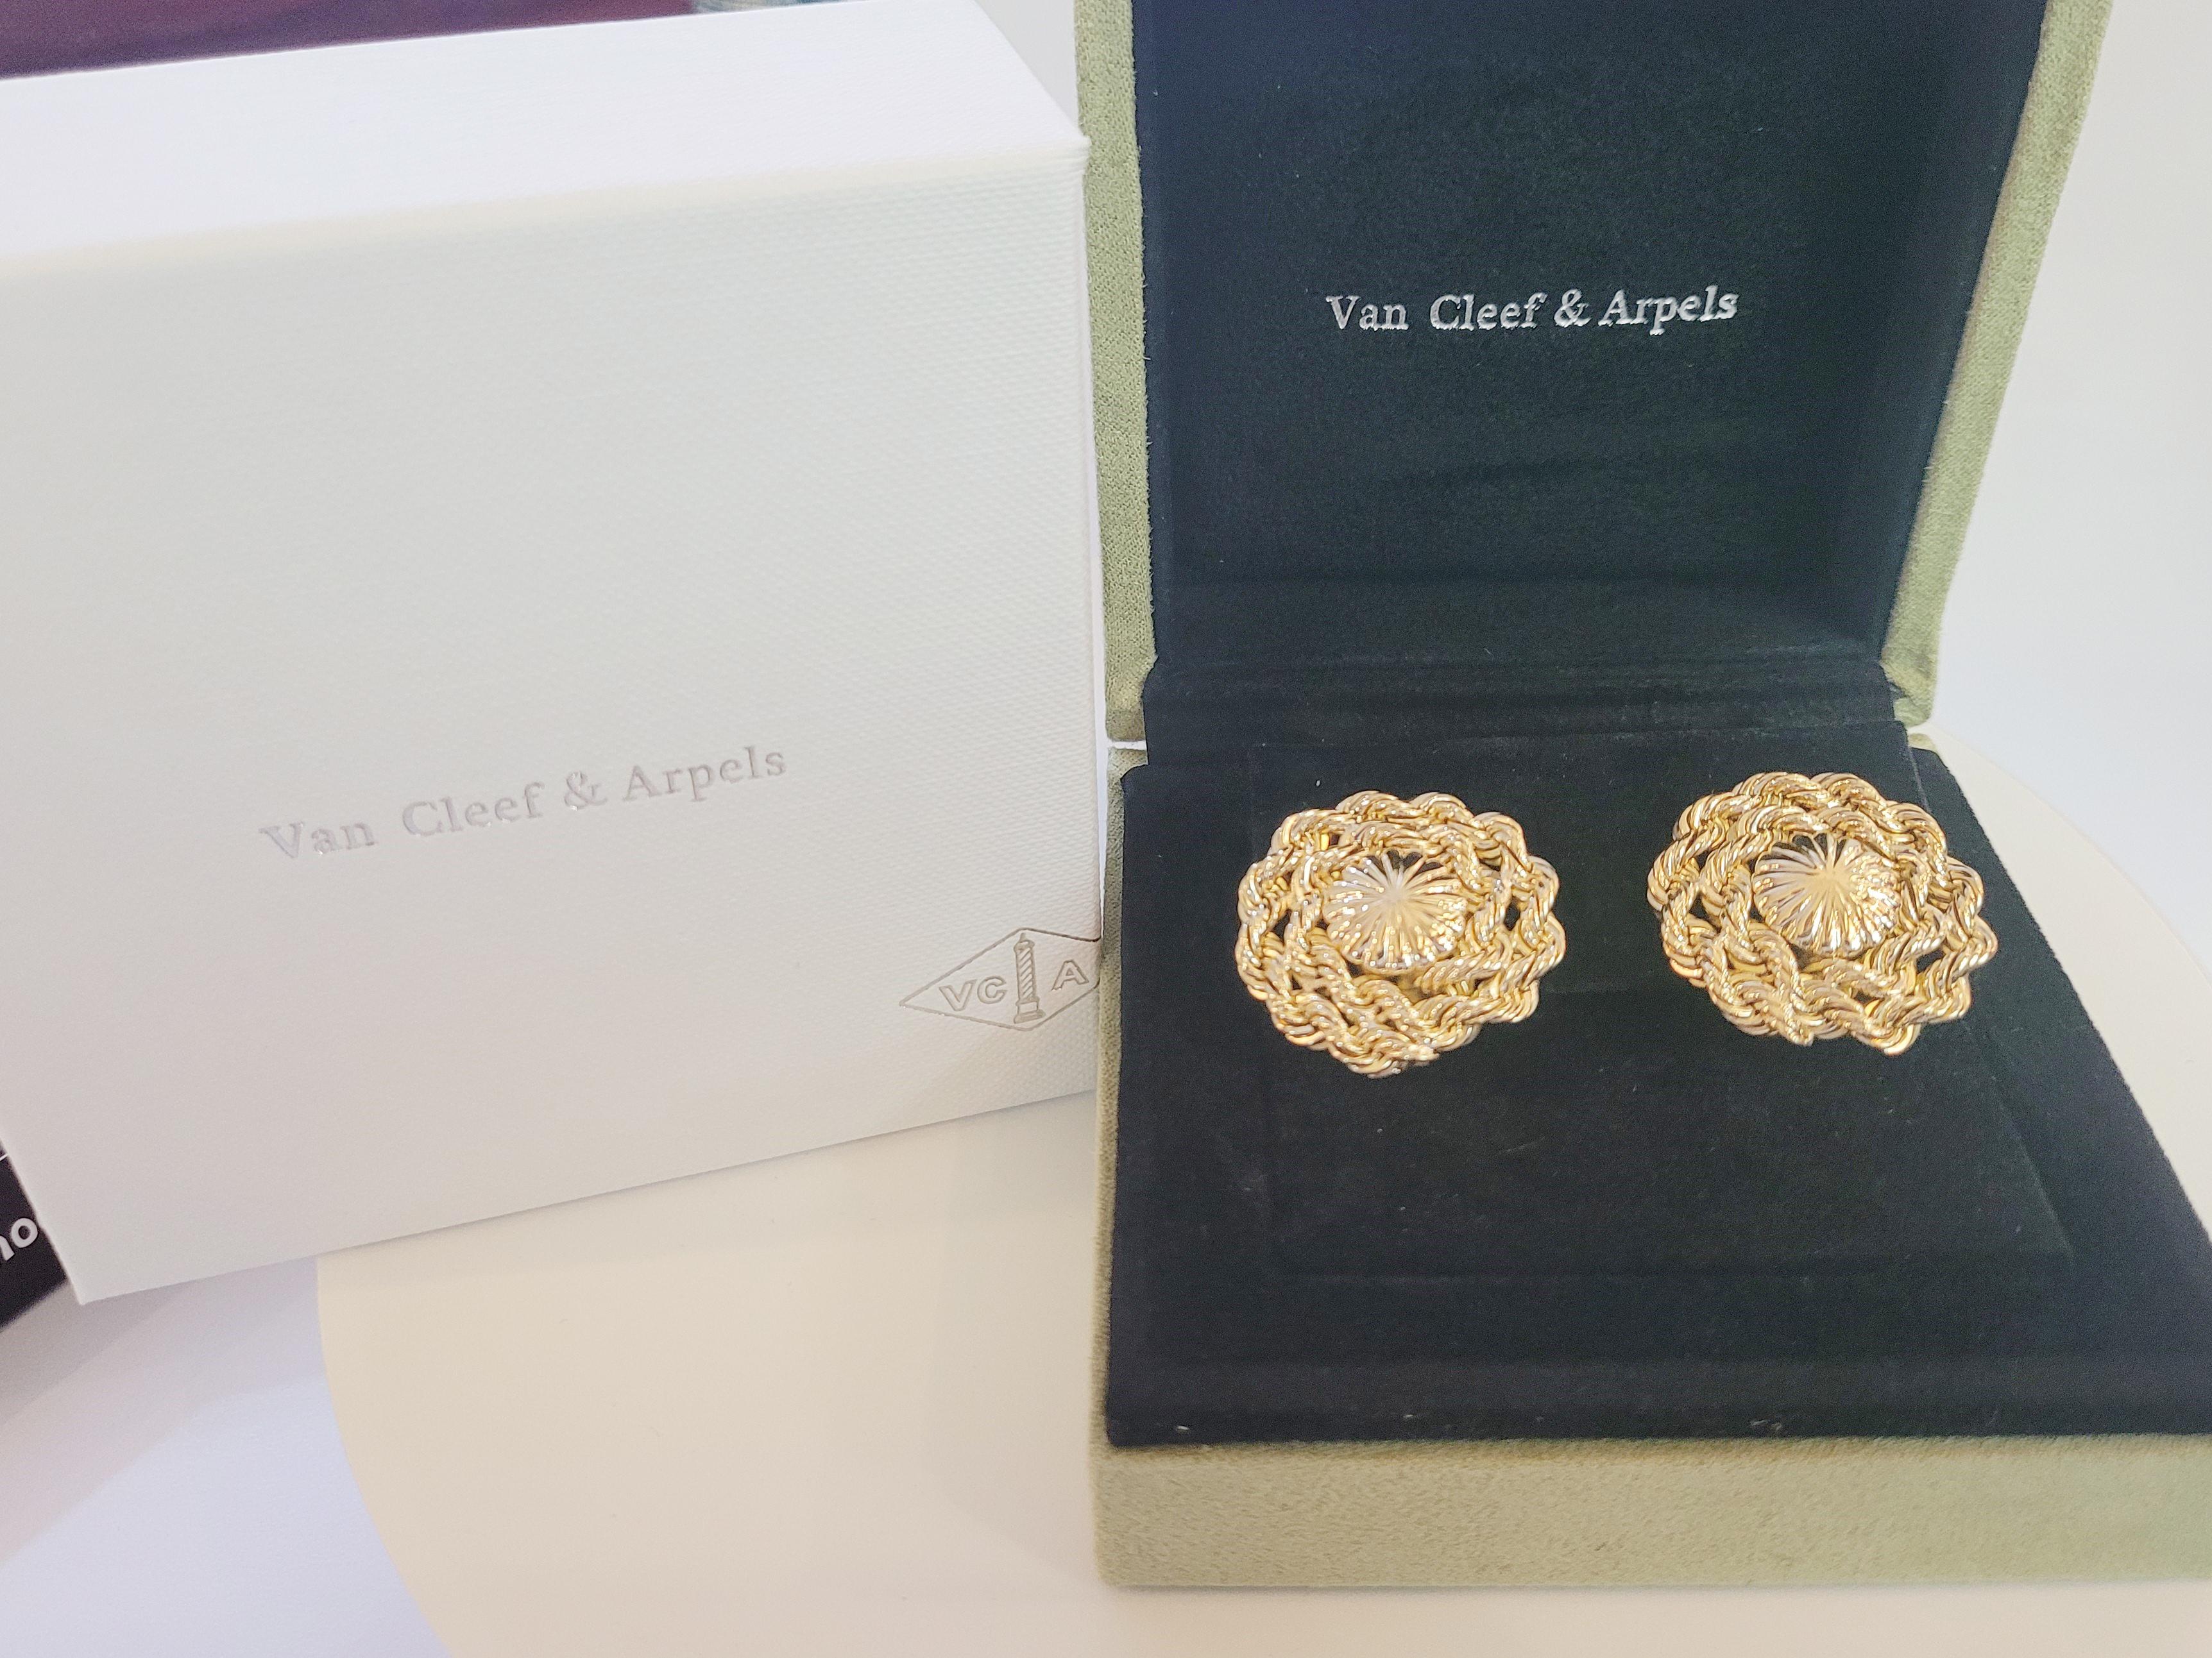 Brand-Van Cleef & Arpels 
Style-Earring
Earring-None pears 
Color-Yellow
Metal purity-18K Yellow Gold
Dimension-28x28 mm
Weight-14.3g
Mint condition
Van Cleef & Arpels box included
Retail:$9000